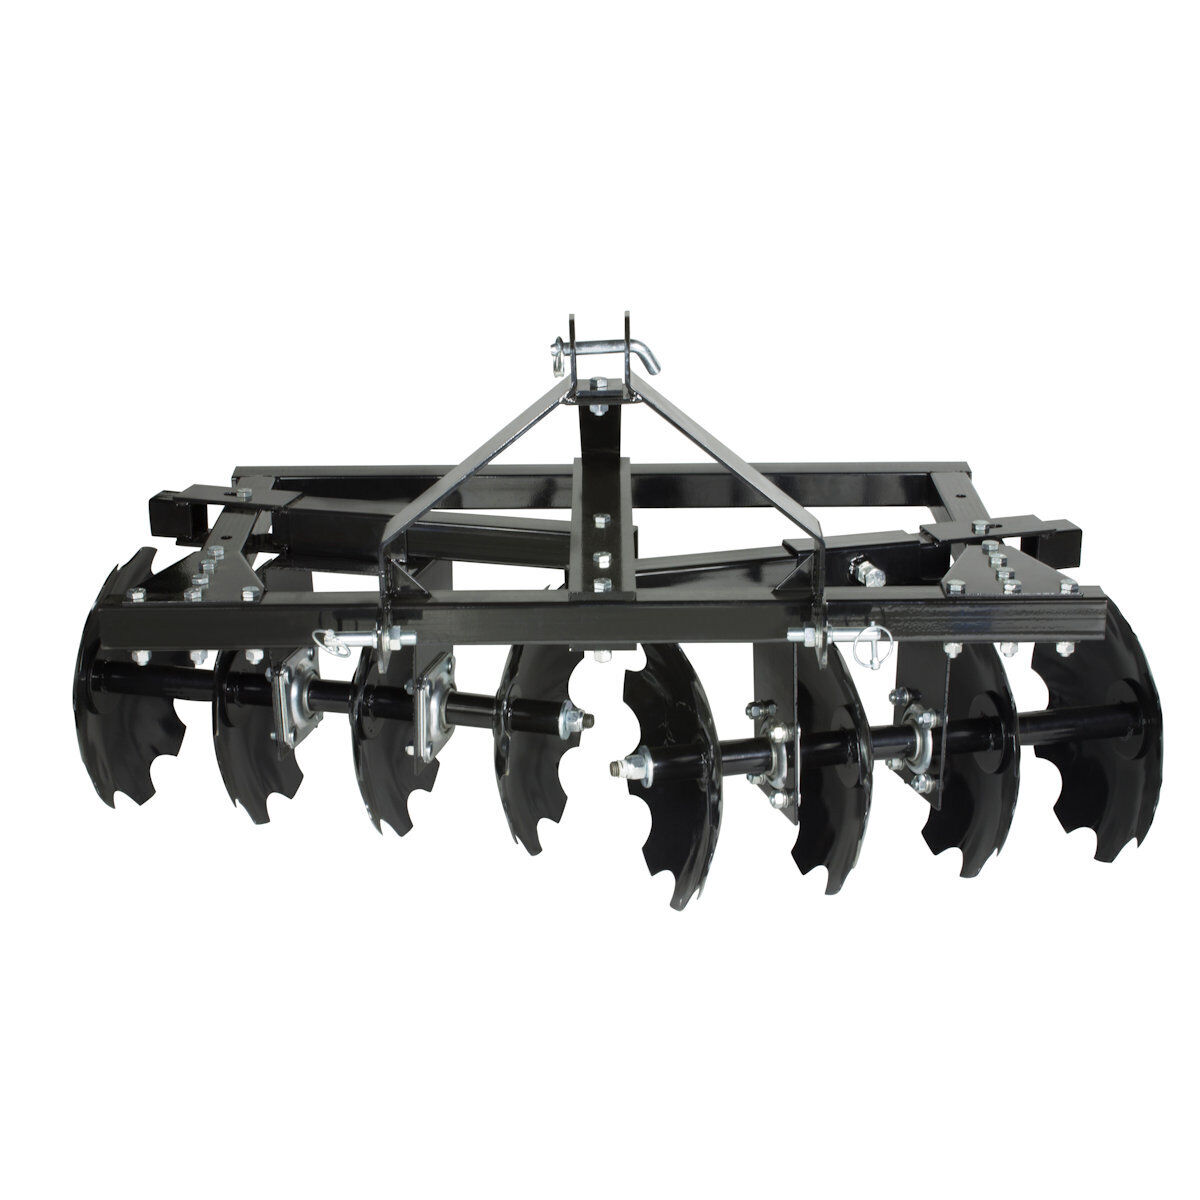 Impact Implements CAT-0 Disc Plow / Harrow Compact Garden Lawn Tractor Accessory